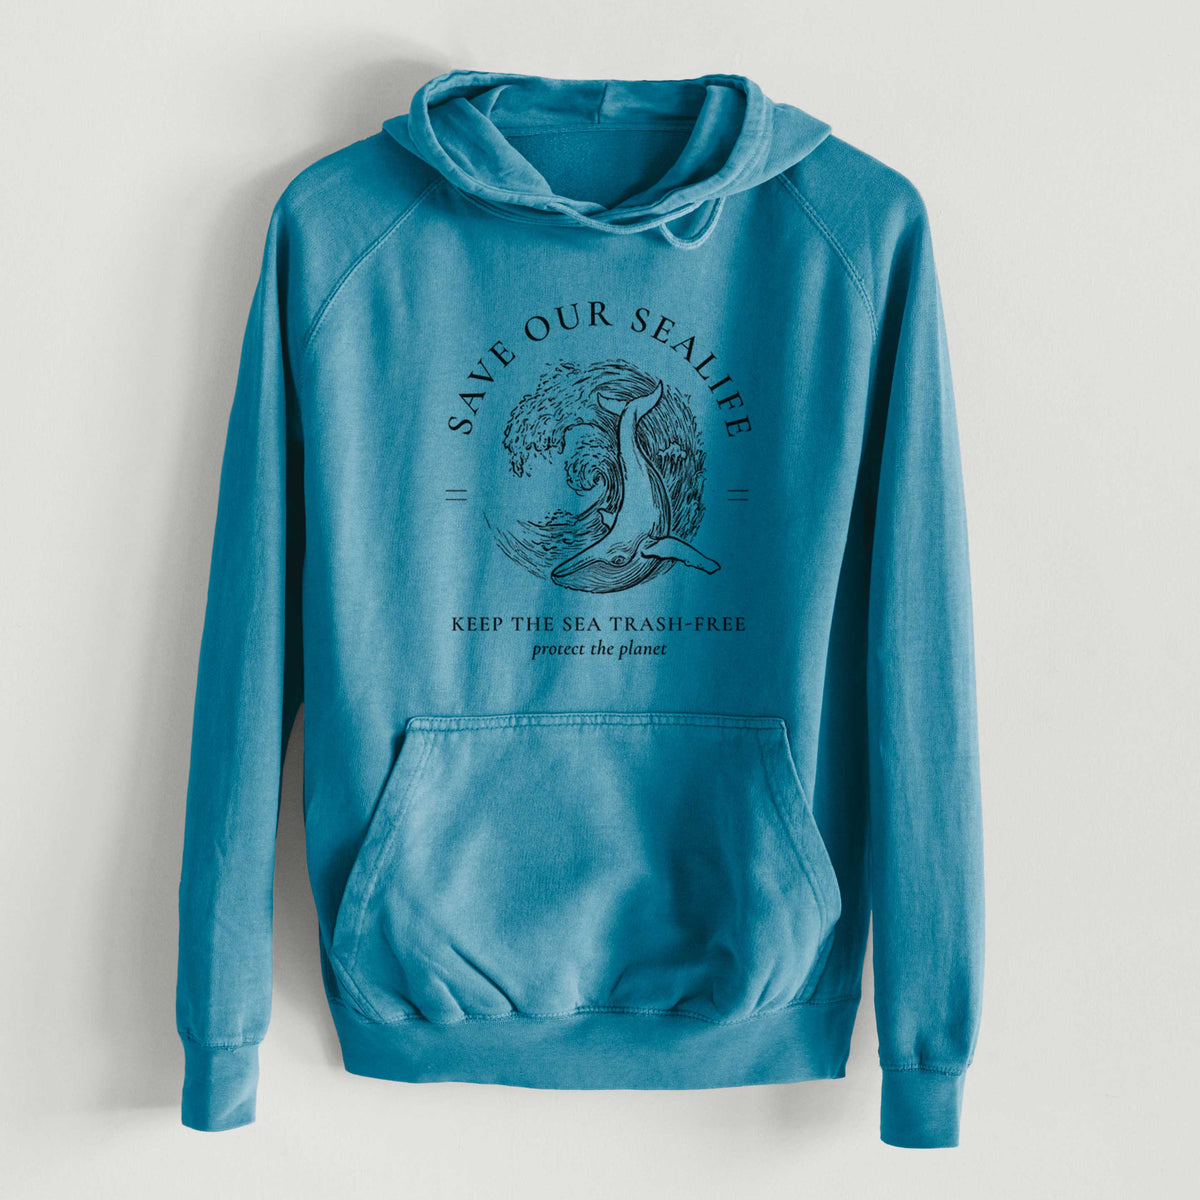 Save our Sealife - Keep the Sea Trash-Free  - Mid-Weight Unisex Vintage 100% Cotton Hoodie